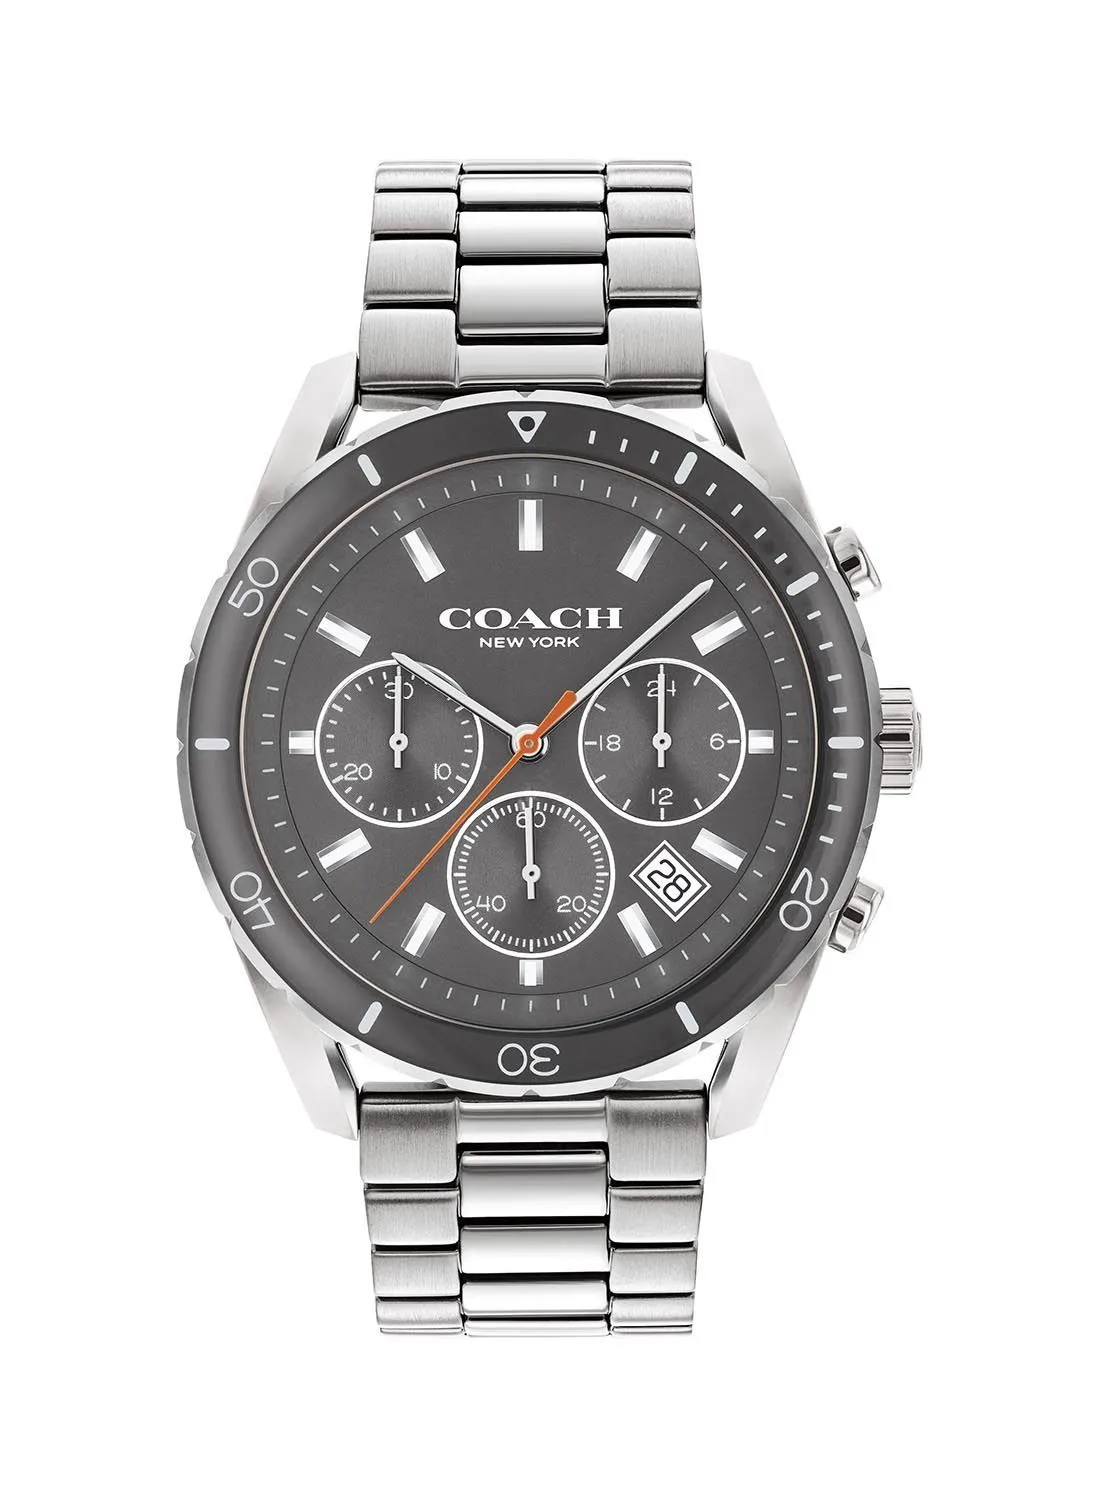 COACH Chronograph Round Wrist Watch With Stainless Steel Strap 14602515